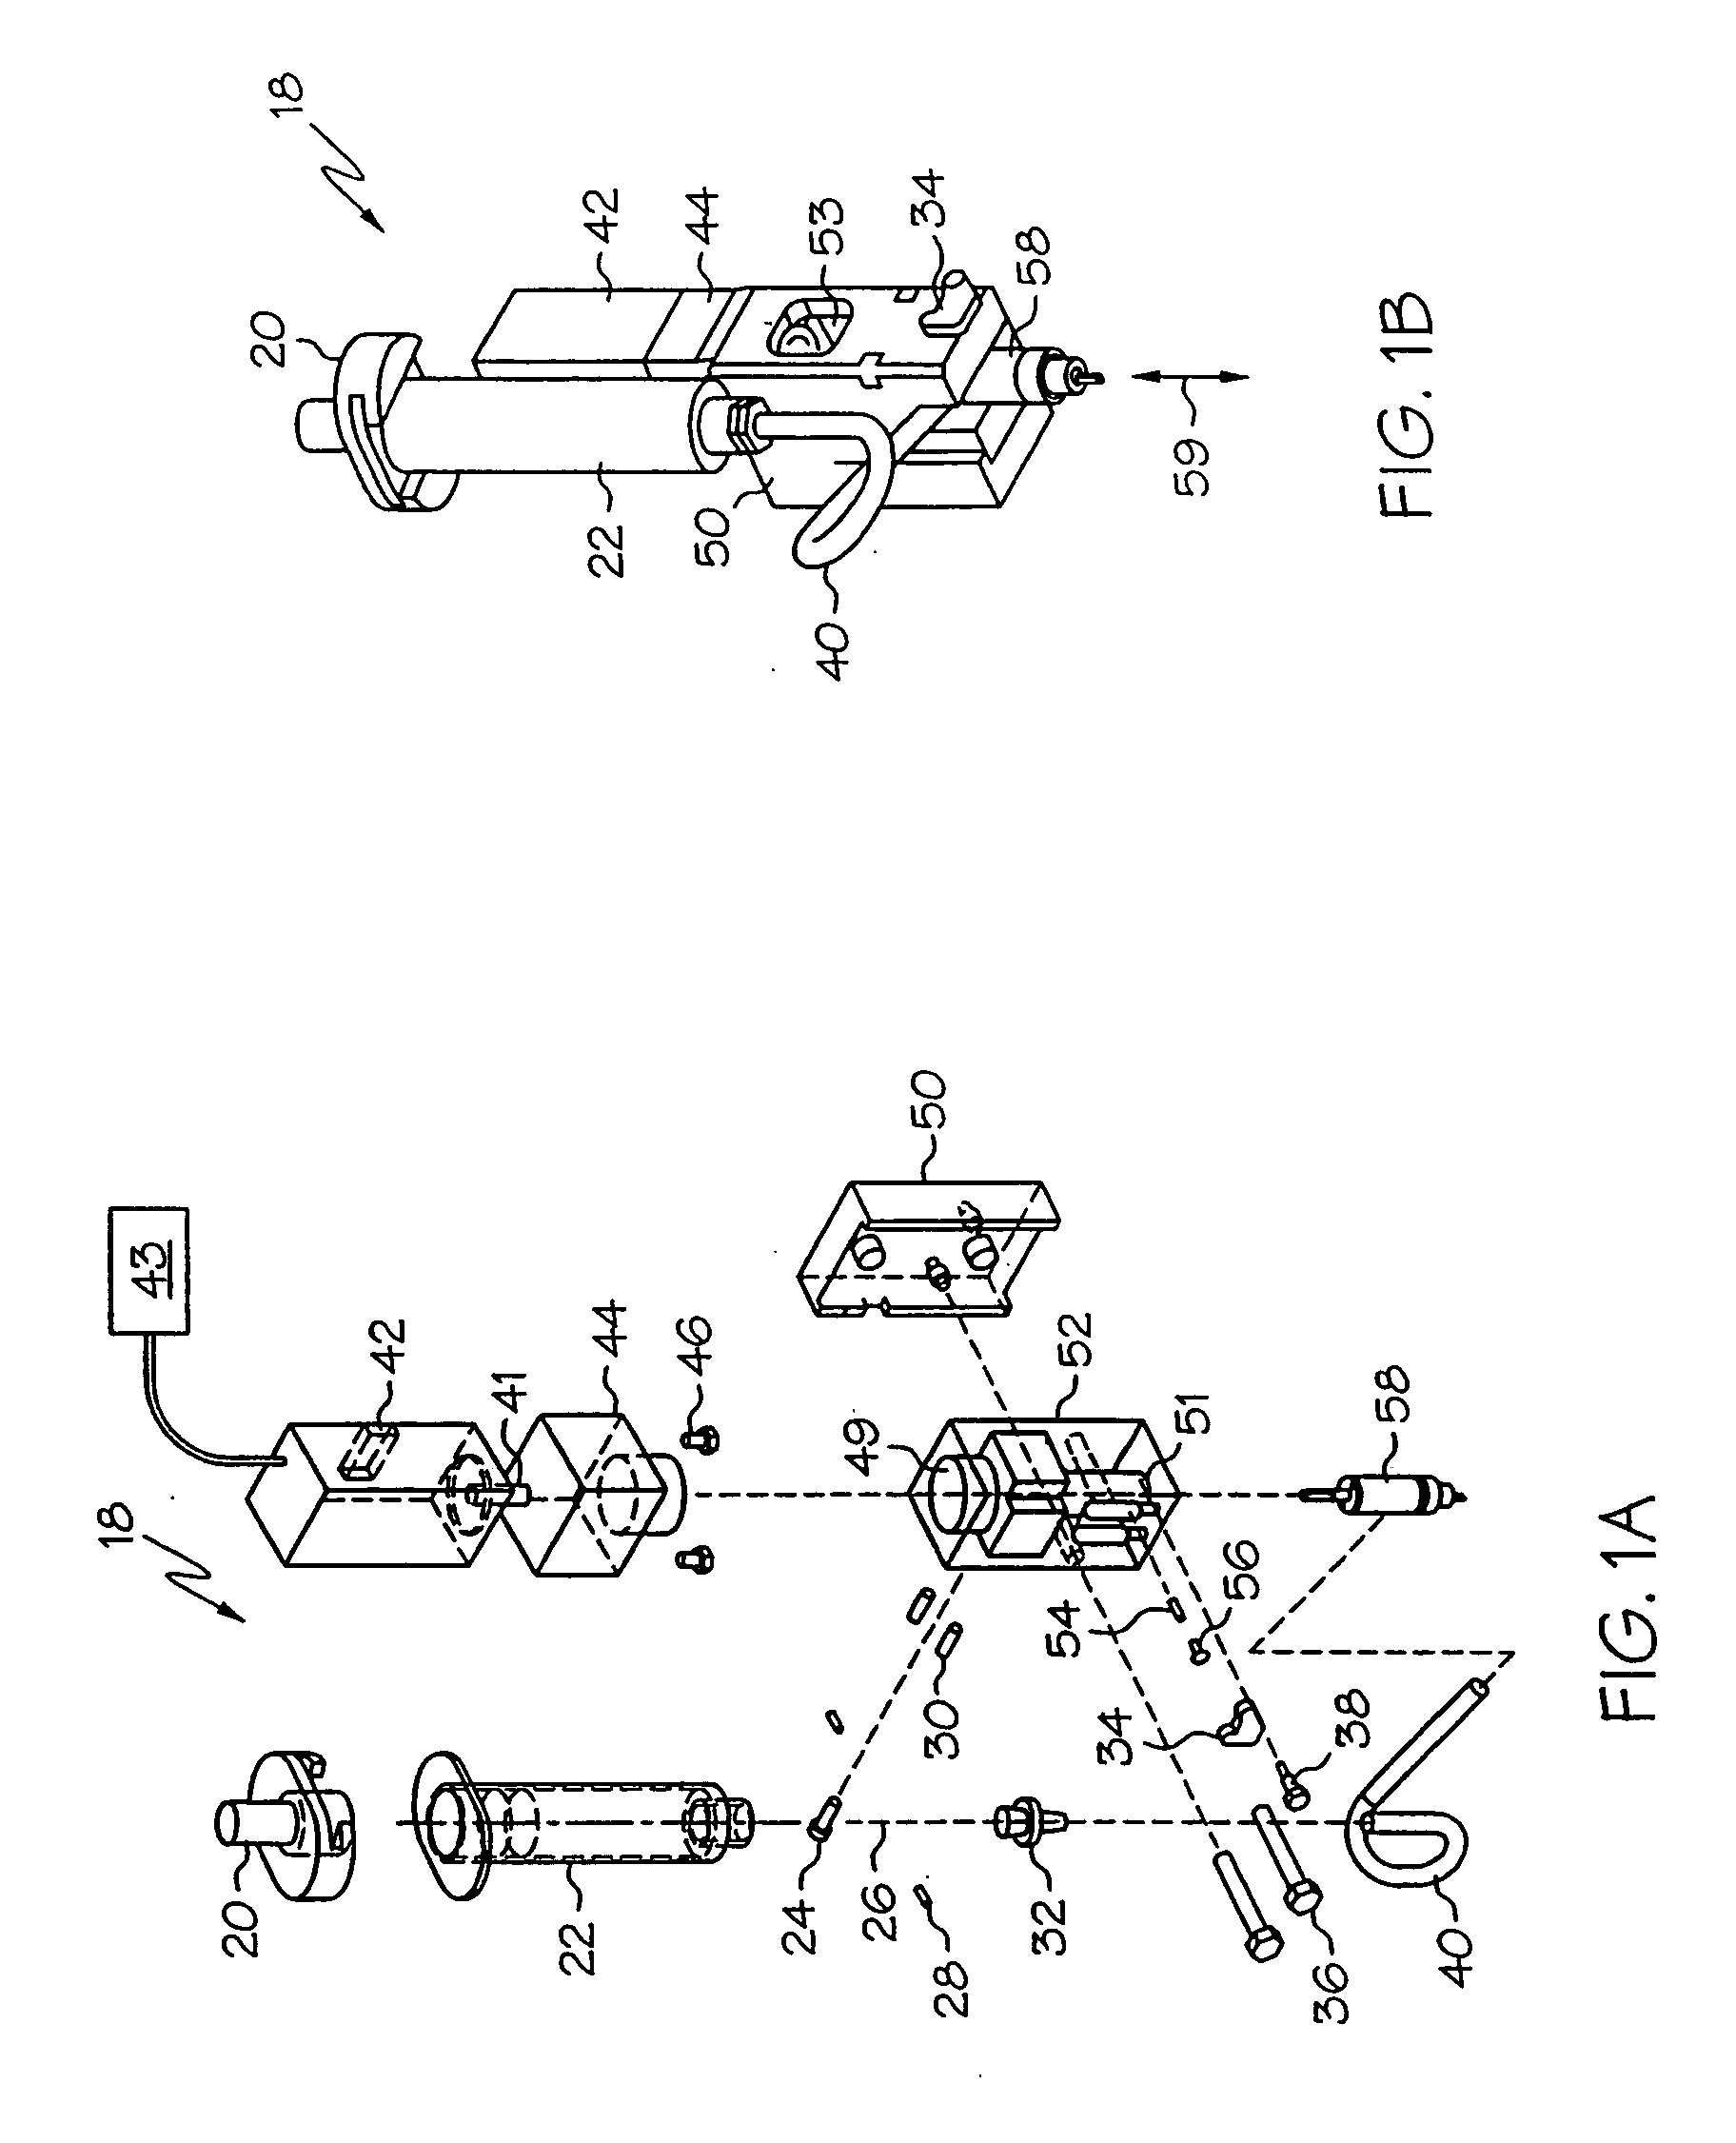 System and method for control of fluid dispense pump